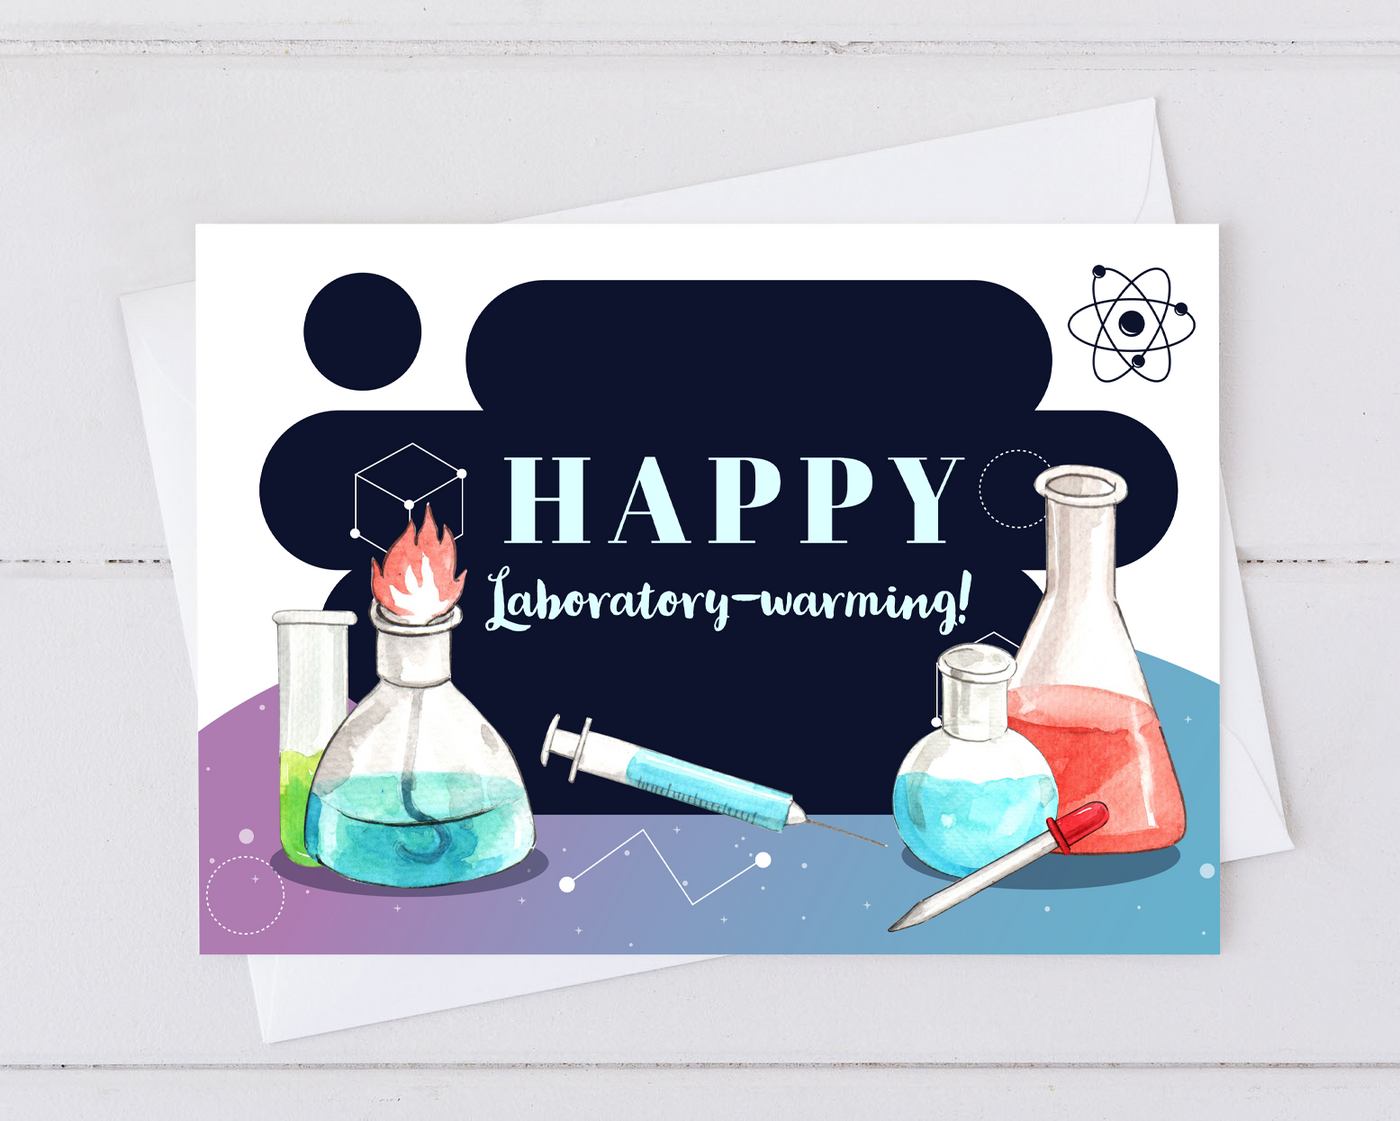 happy laboratory warming card for congratulating scientists on joining a new lab